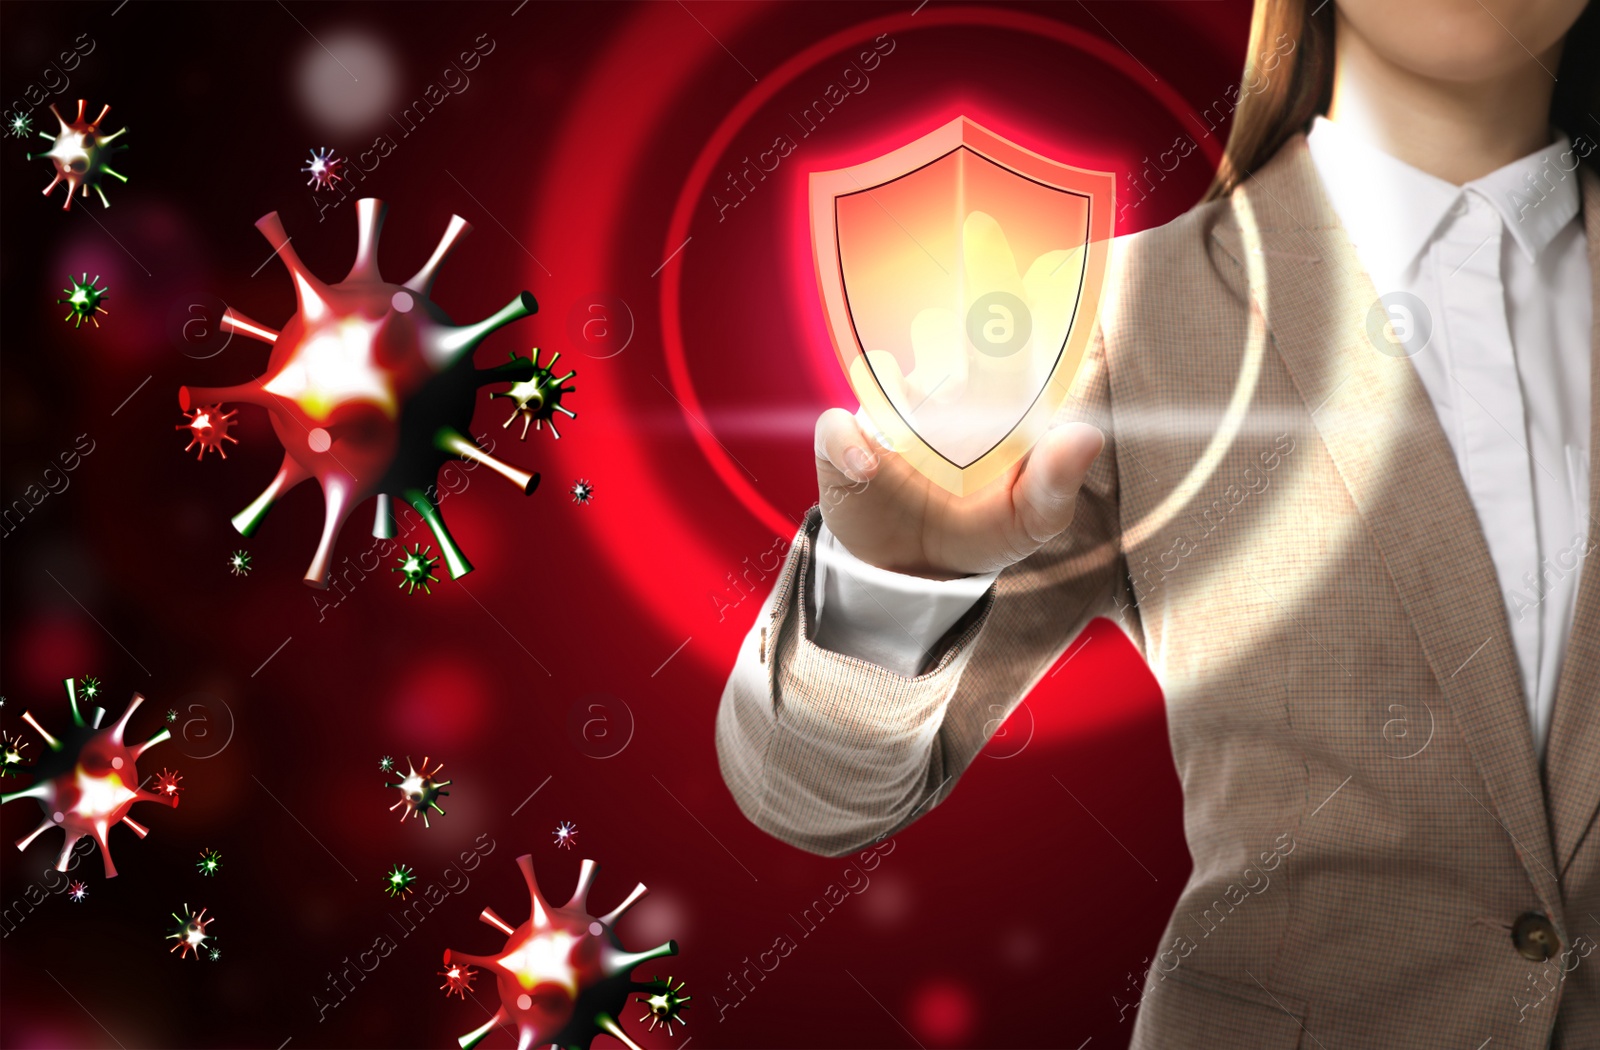 Image of Be healthy - boost your immunity. Woman activating shield icon as virus protection, closeup